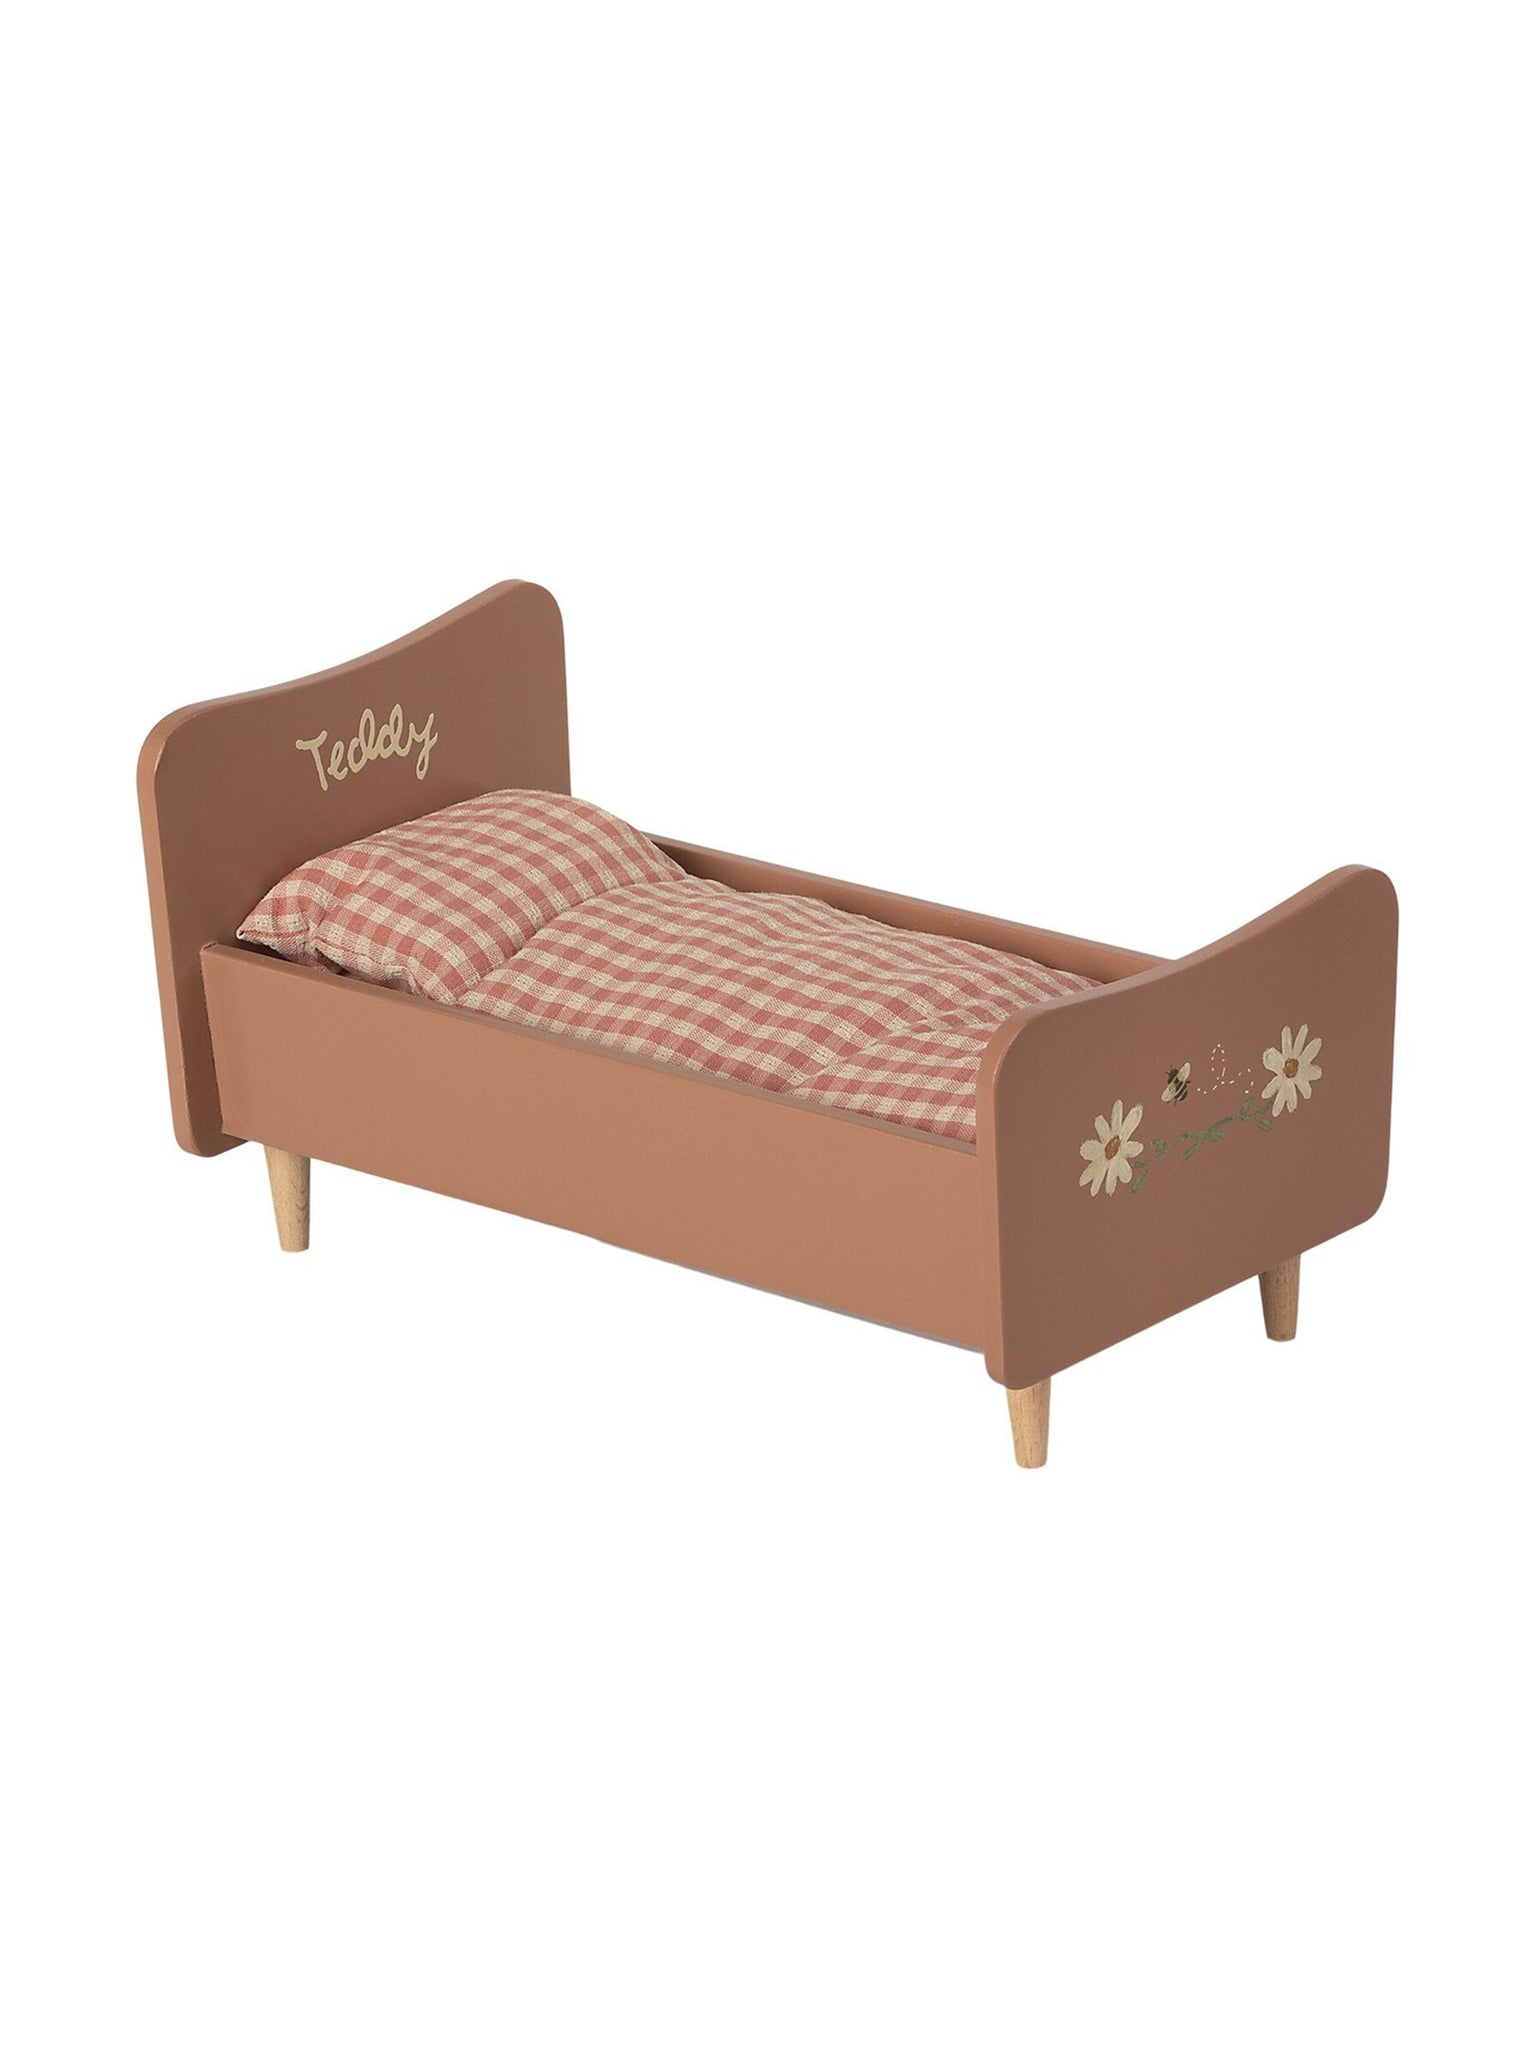 Maileg Wooden Bed for Teddy Mom Weston Table